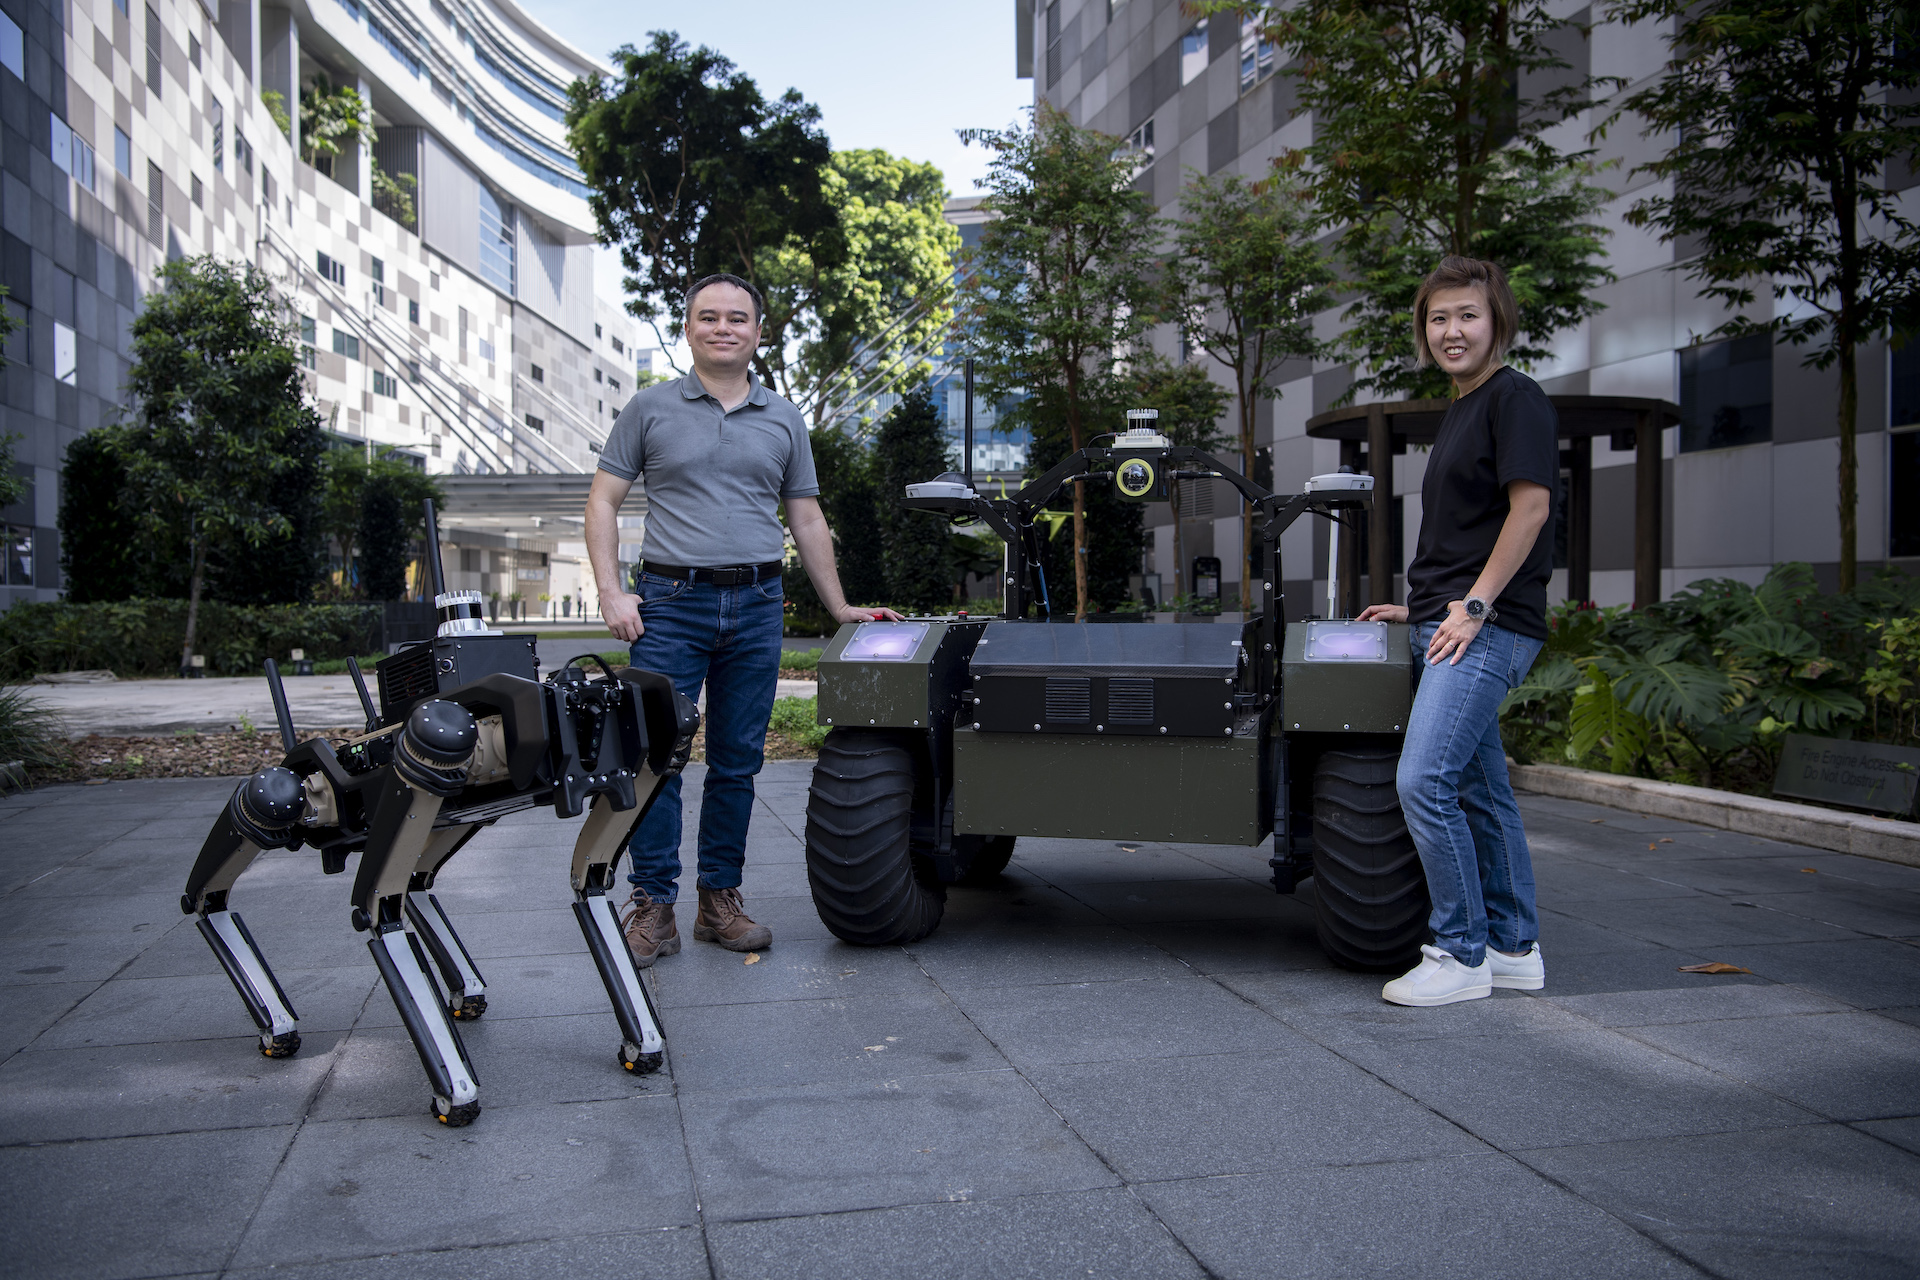 DSO's Robot "Dogs" Lead the Way